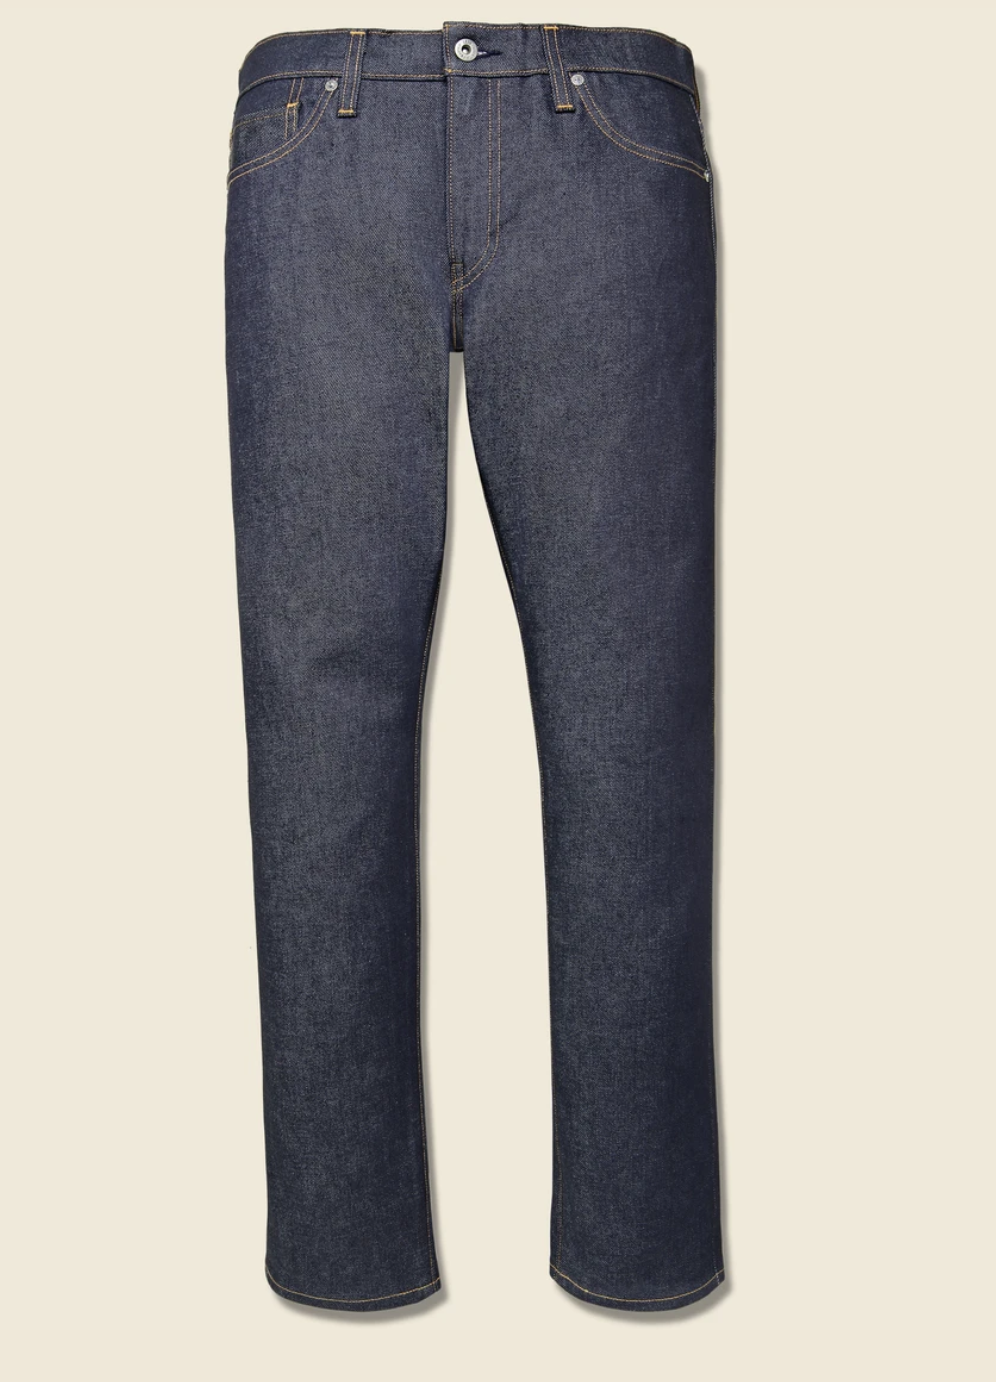 Levis Made & Crafted 511 Slim Fit ($188)